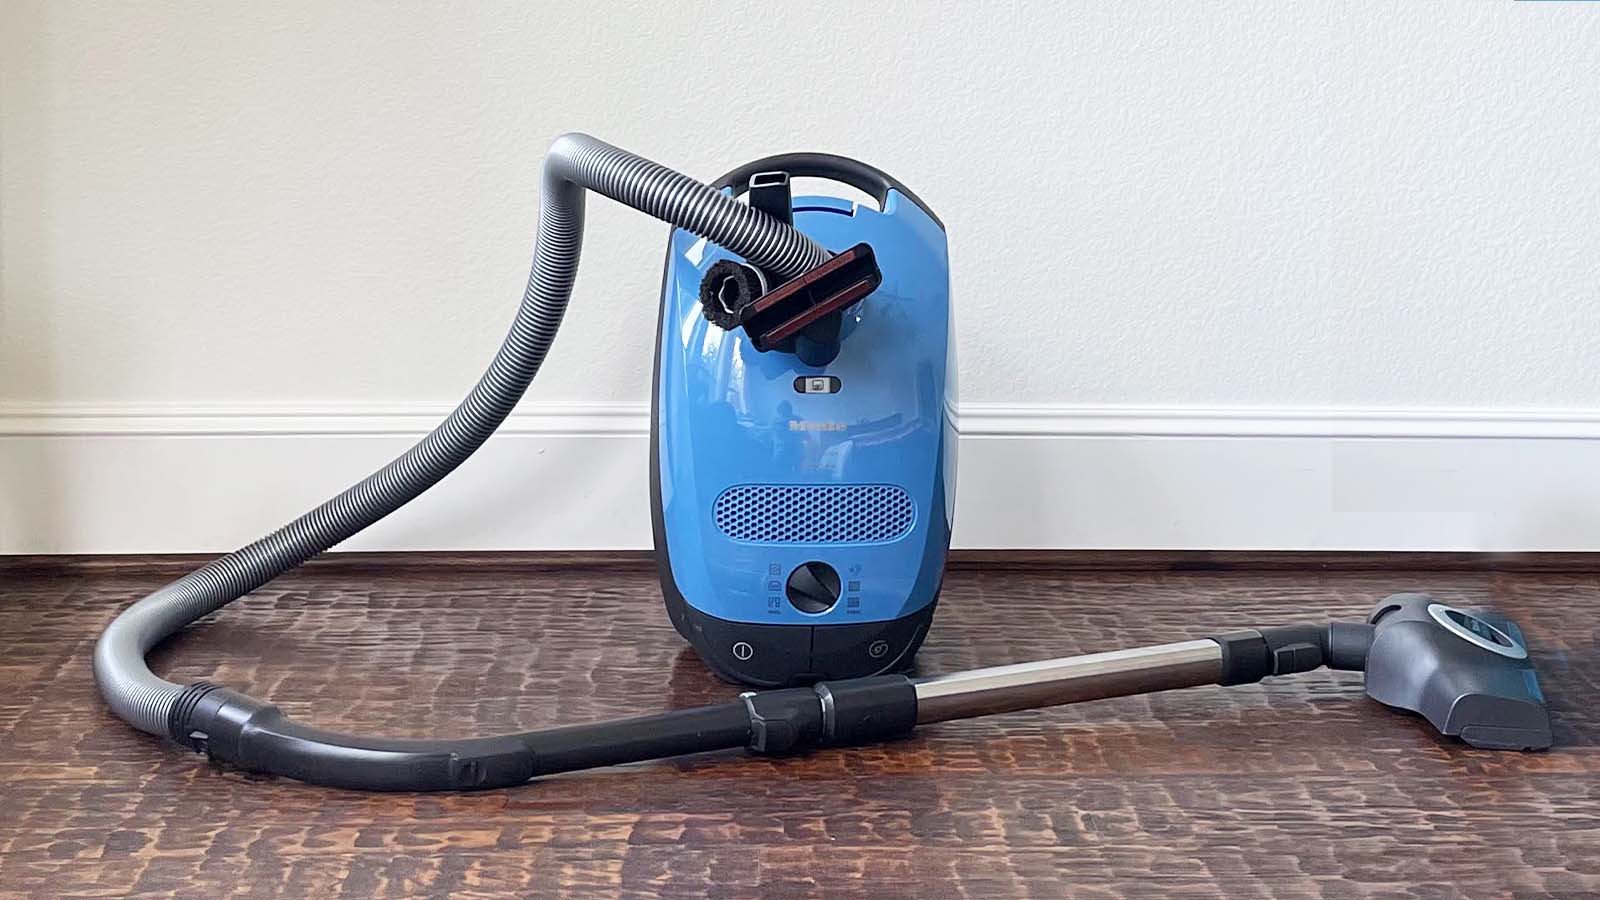 The best canister vacuums in 2024, tried and tested